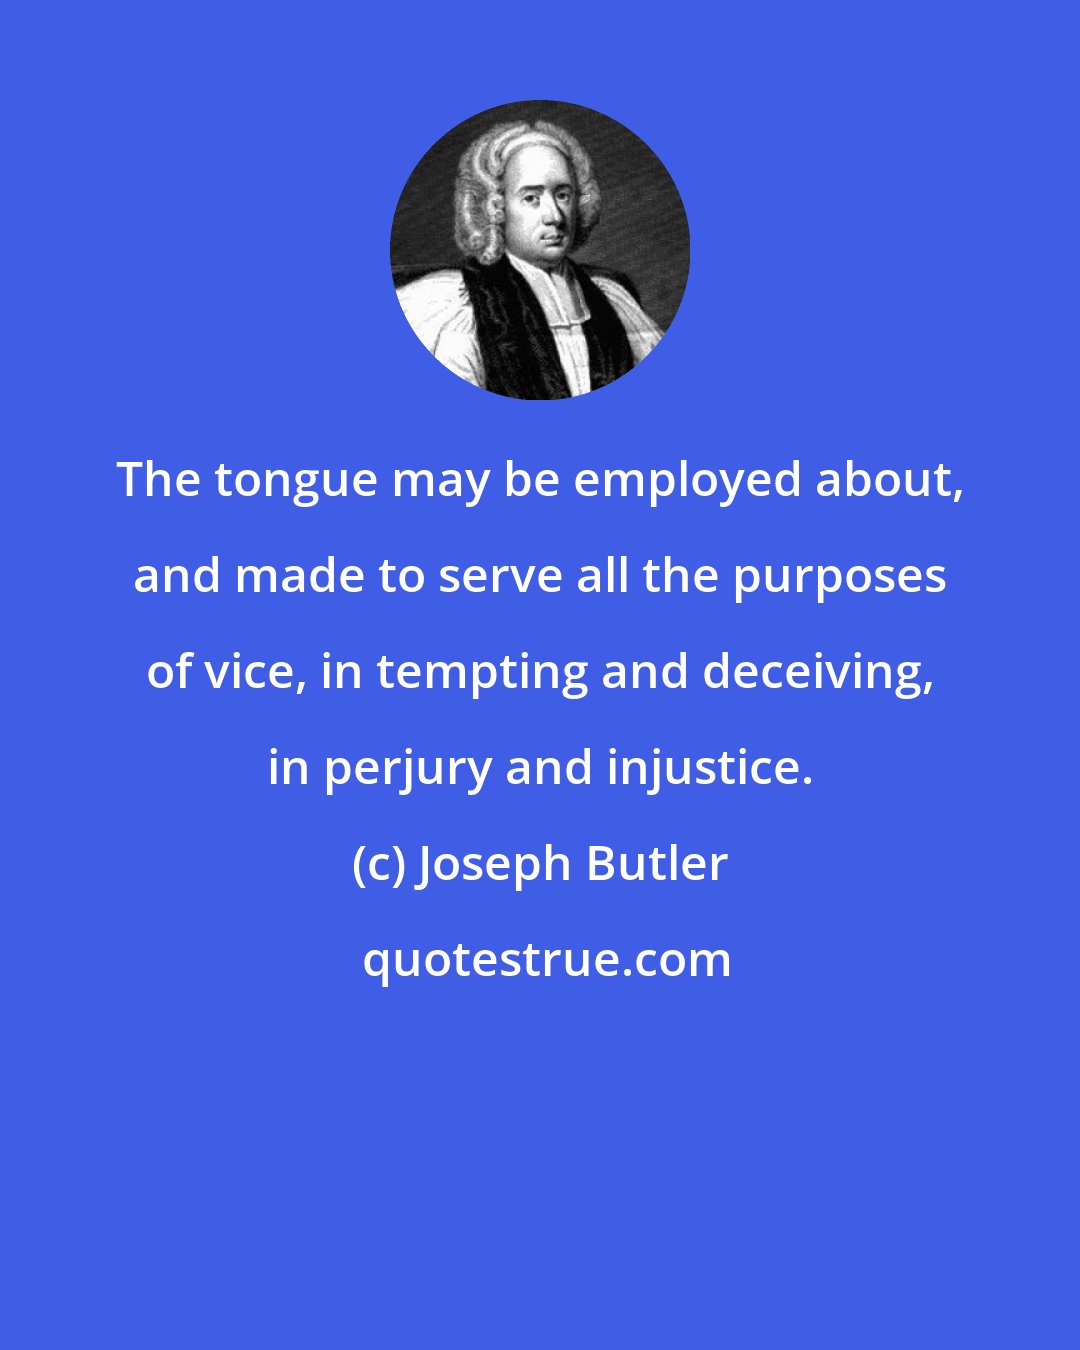 Joseph Butler: The tongue may be employed about, and made to serve all the purposes of vice, in tempting and deceiving, in perjury and injustice.